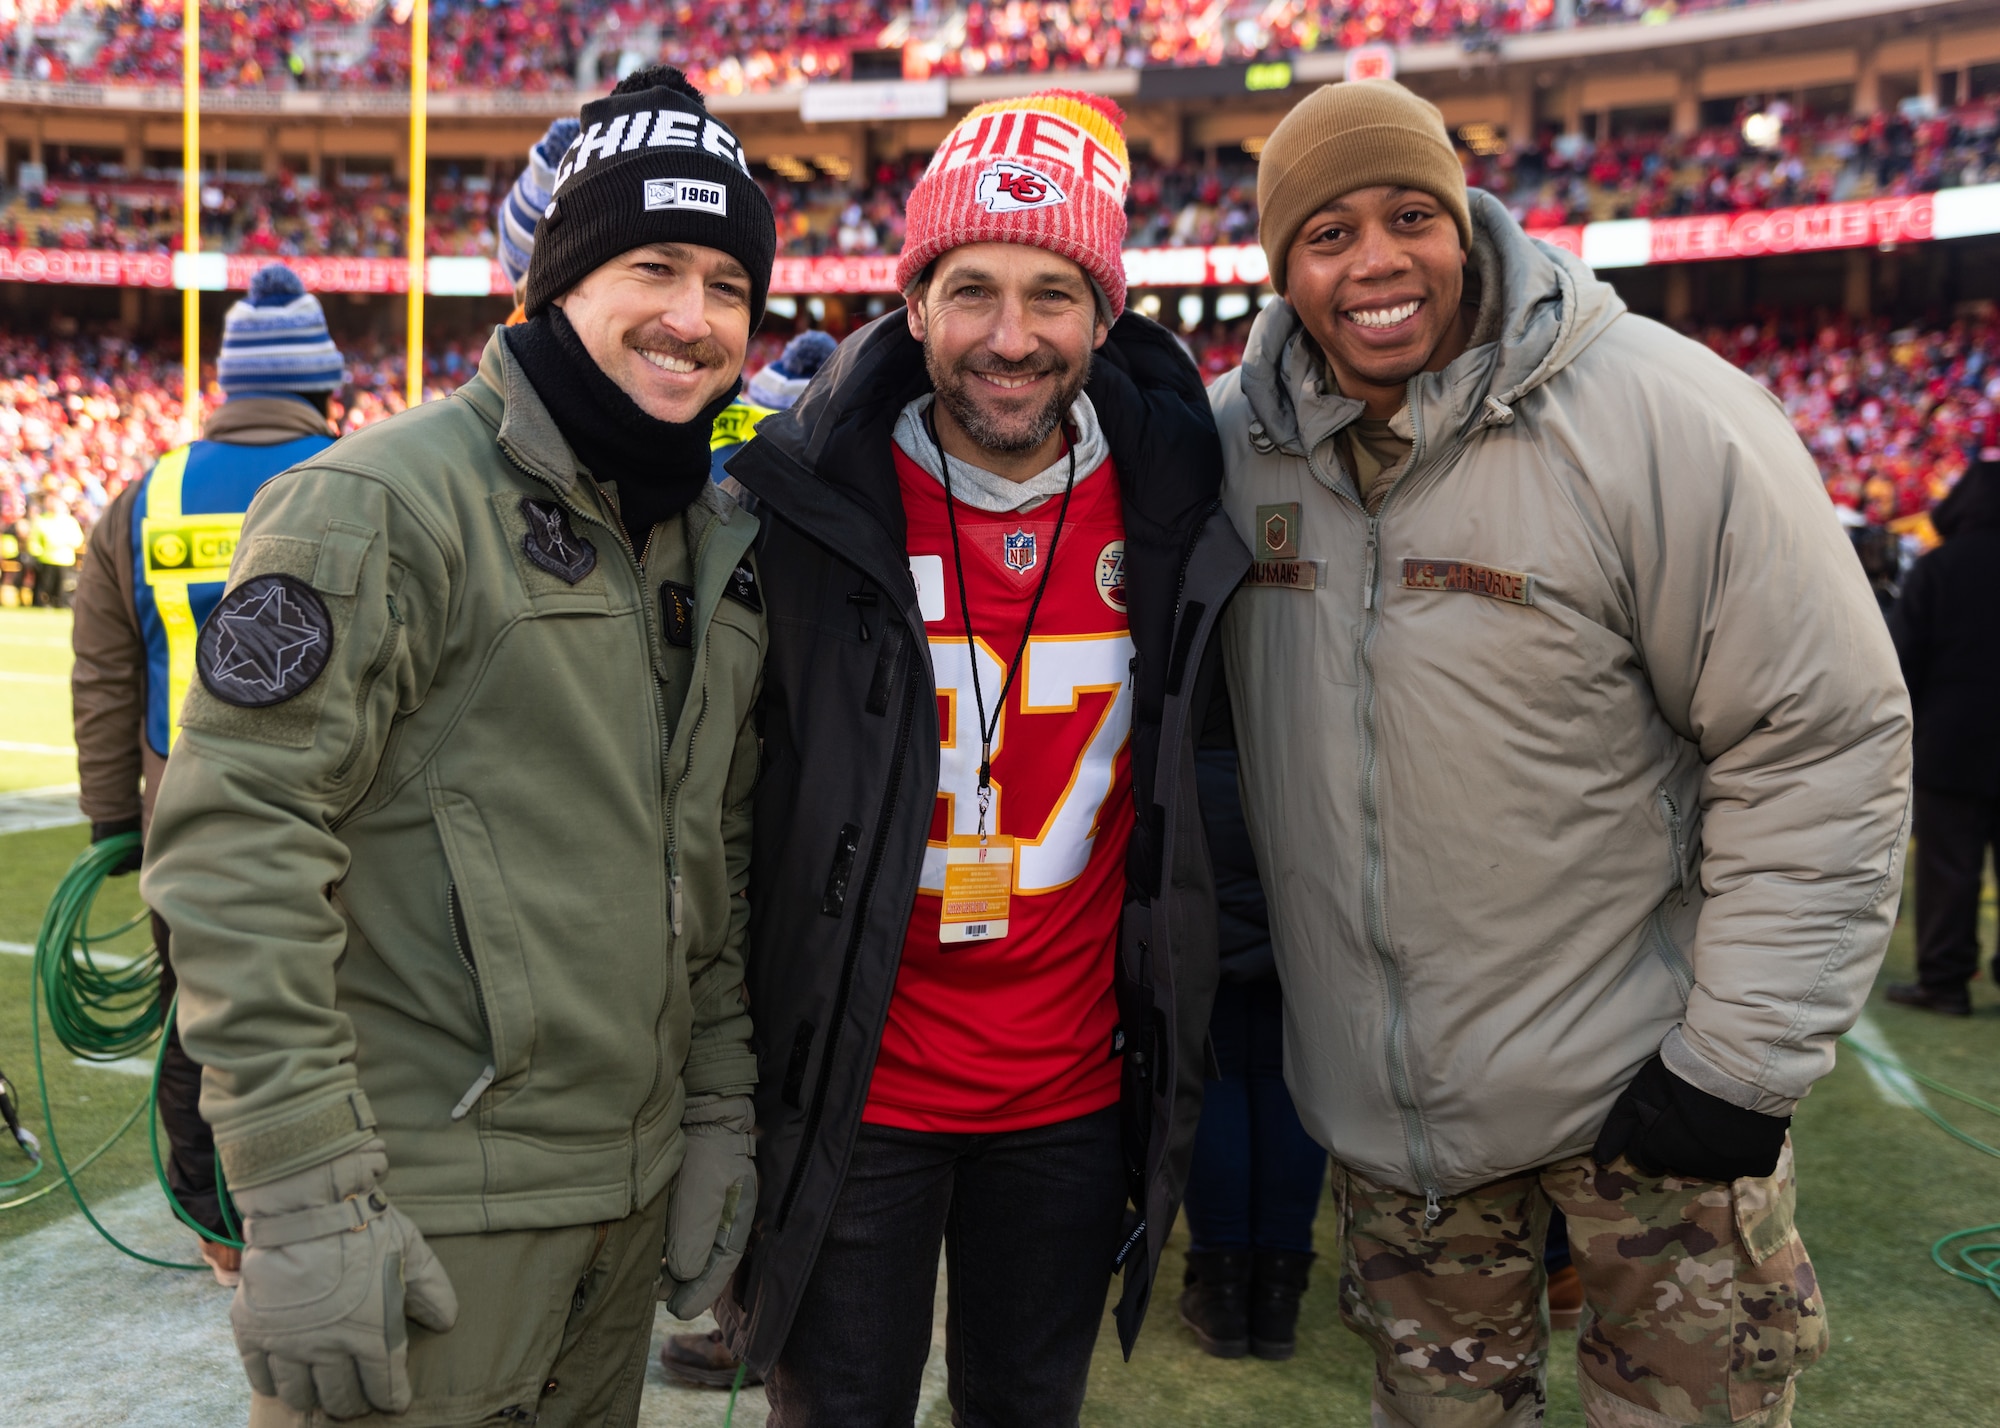 Airmen assigned to the 509th Bomb Wing and the 131st Bomb Wing at Whiteman Air Force Base, Missouri, stand with actor Paul Rudd before the AFC Championship game on Jan. 19, 2020, at Arrowhead Stadium, Kansas City, Missouri. Rudd has appeared in movies such as Ant Man, Guardians of the Galaxy and Living With Yourself. He is a Kansas City native and was the Spirit Leader in charge of hitting the ceremonial drum used to hype the crowd up during the game. Before the game a B-2 Spirit Stealth Bomber from Whiteman AFB ﬂew over stadium and during the third quarter the Kansas City Chiefs recognized Airmen for coordinating the ground work for the ﬂyover. (U.S. Air Force photo by Senior Airman Thomas Barley)